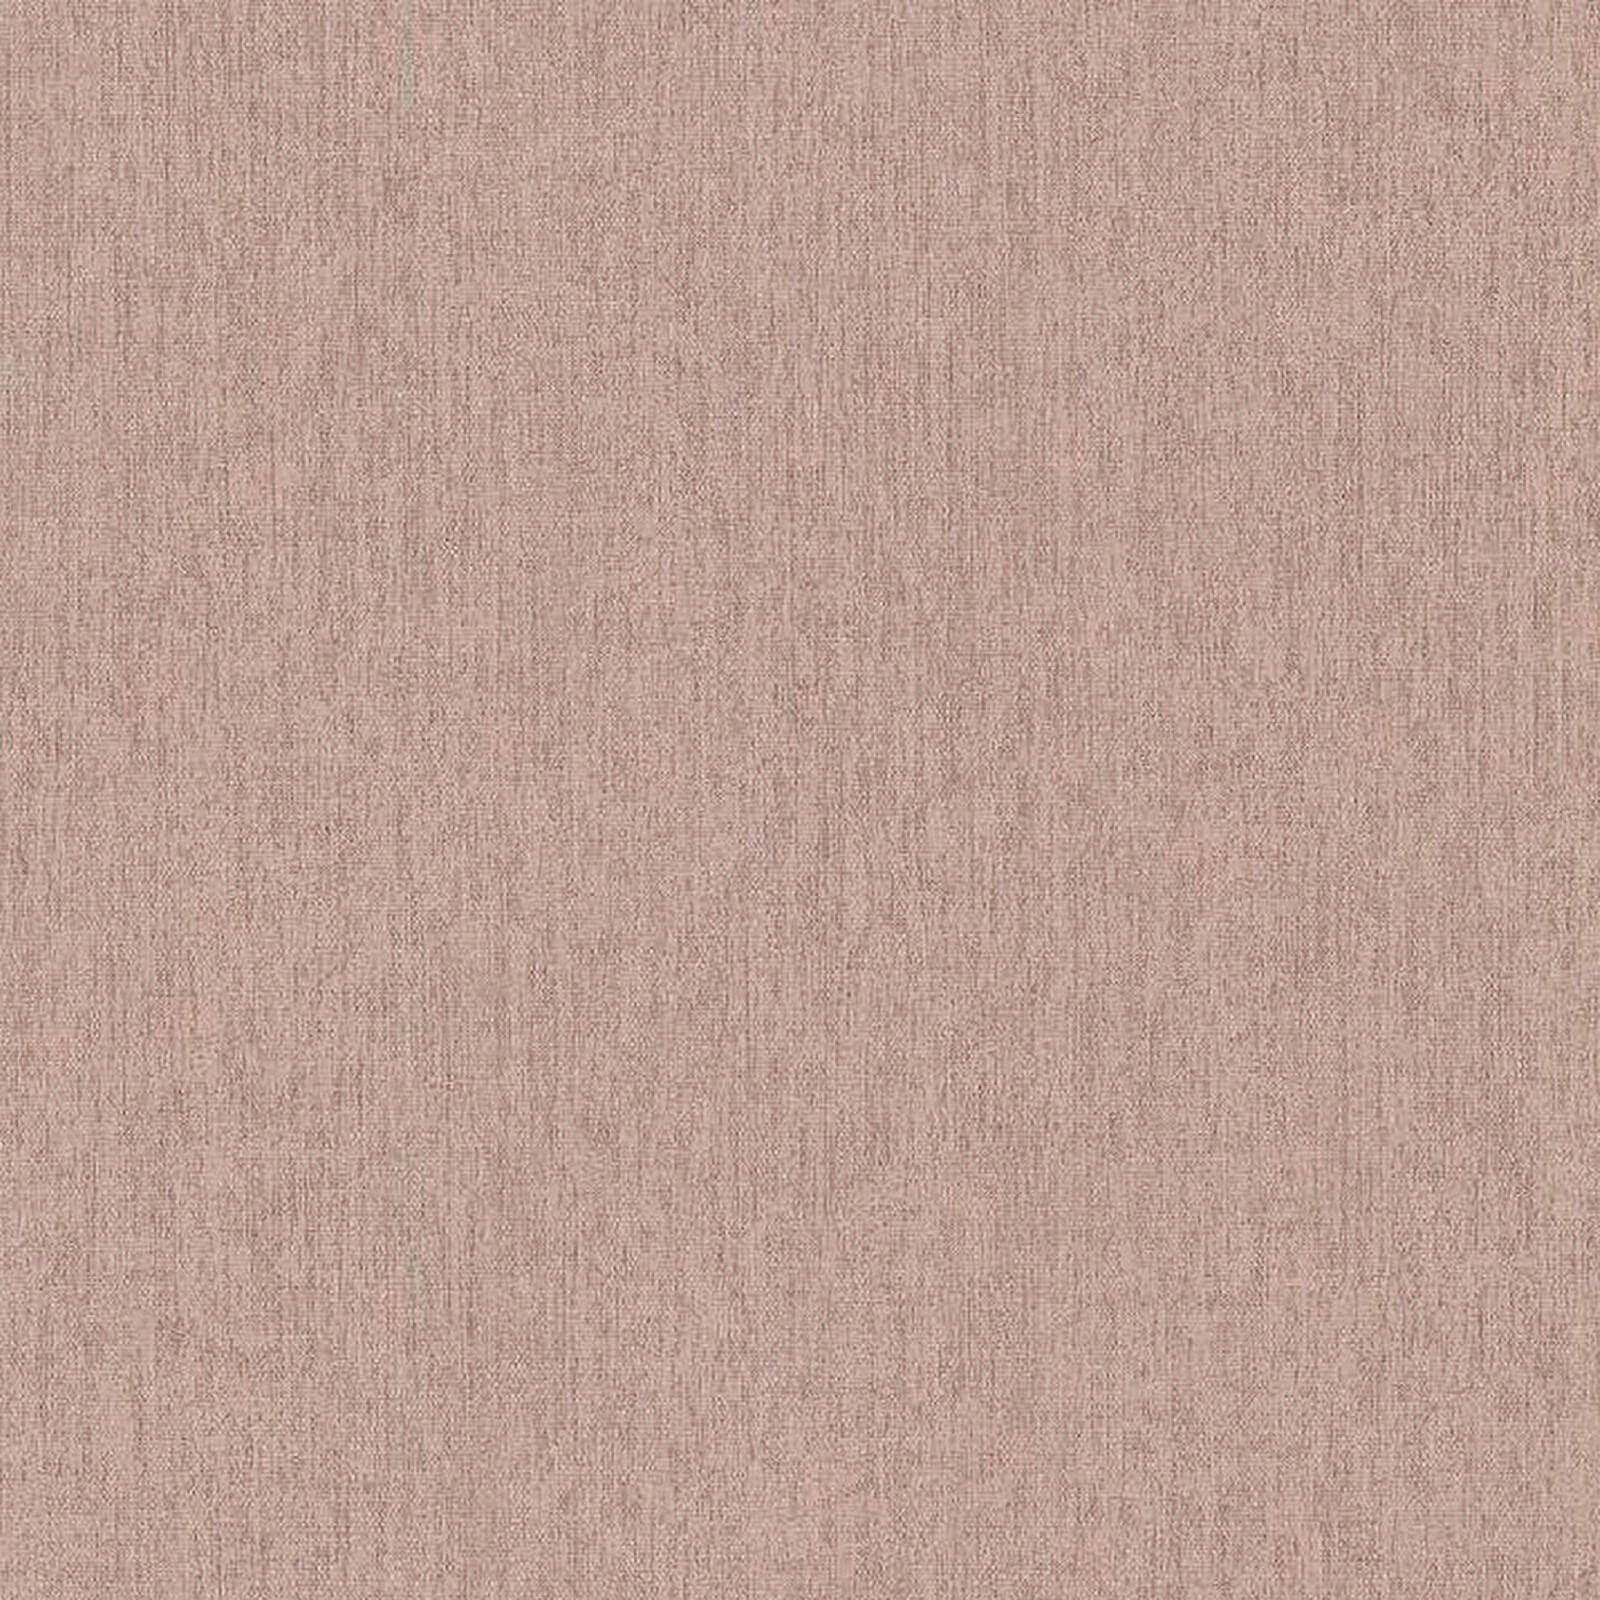 Superfresco Easy Calico Paste the Wall Wallpaper - Natural